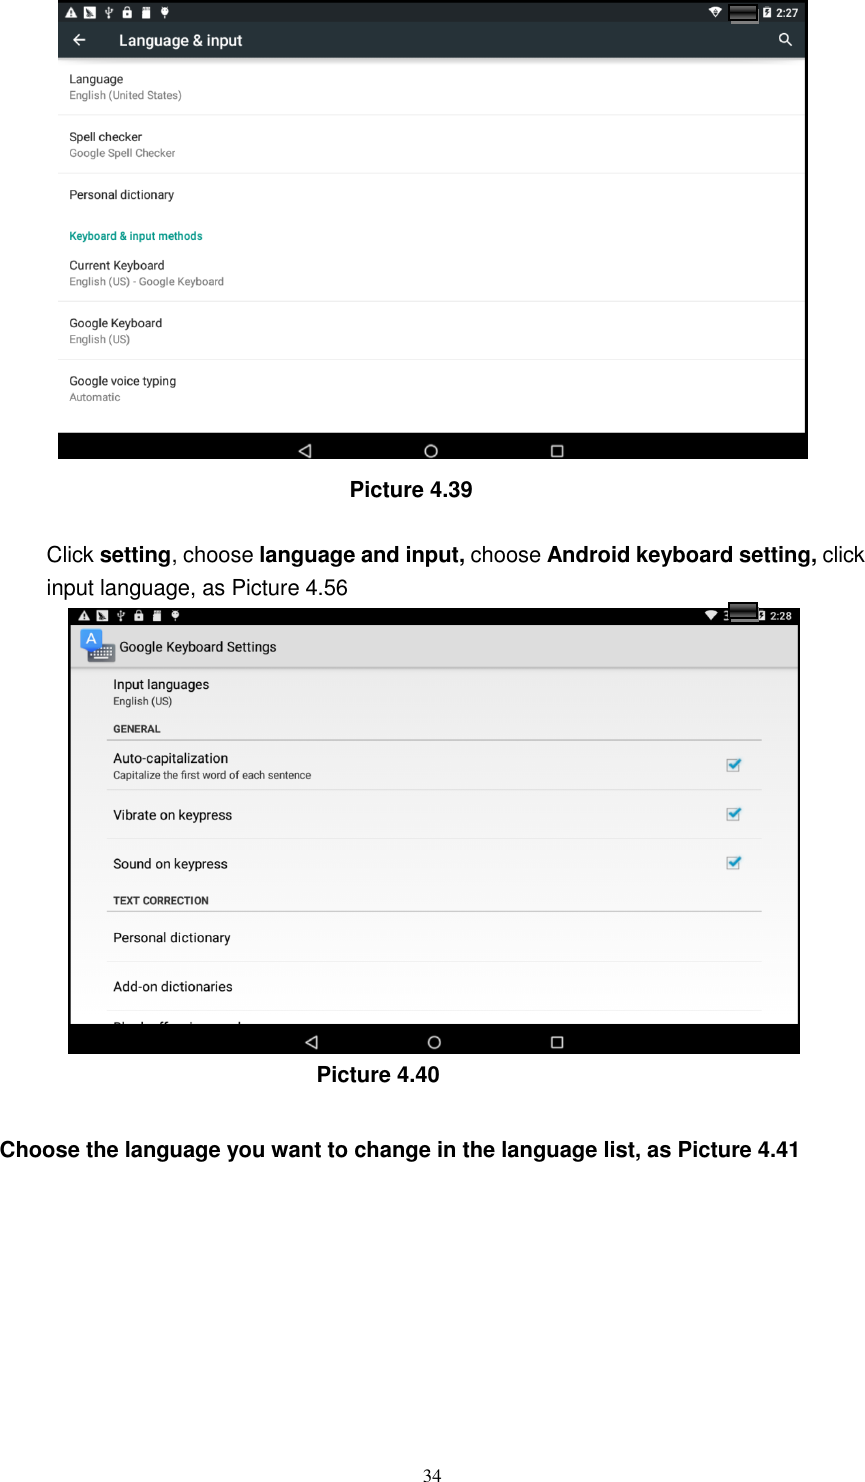      34                                  Picture 4.39  Click setting, choose language and input, choose Android keyboard setting, click input language, as Picture 4.56                               Picture 4.40  Choose the language you want to change in the language list, as Picture 4.41 